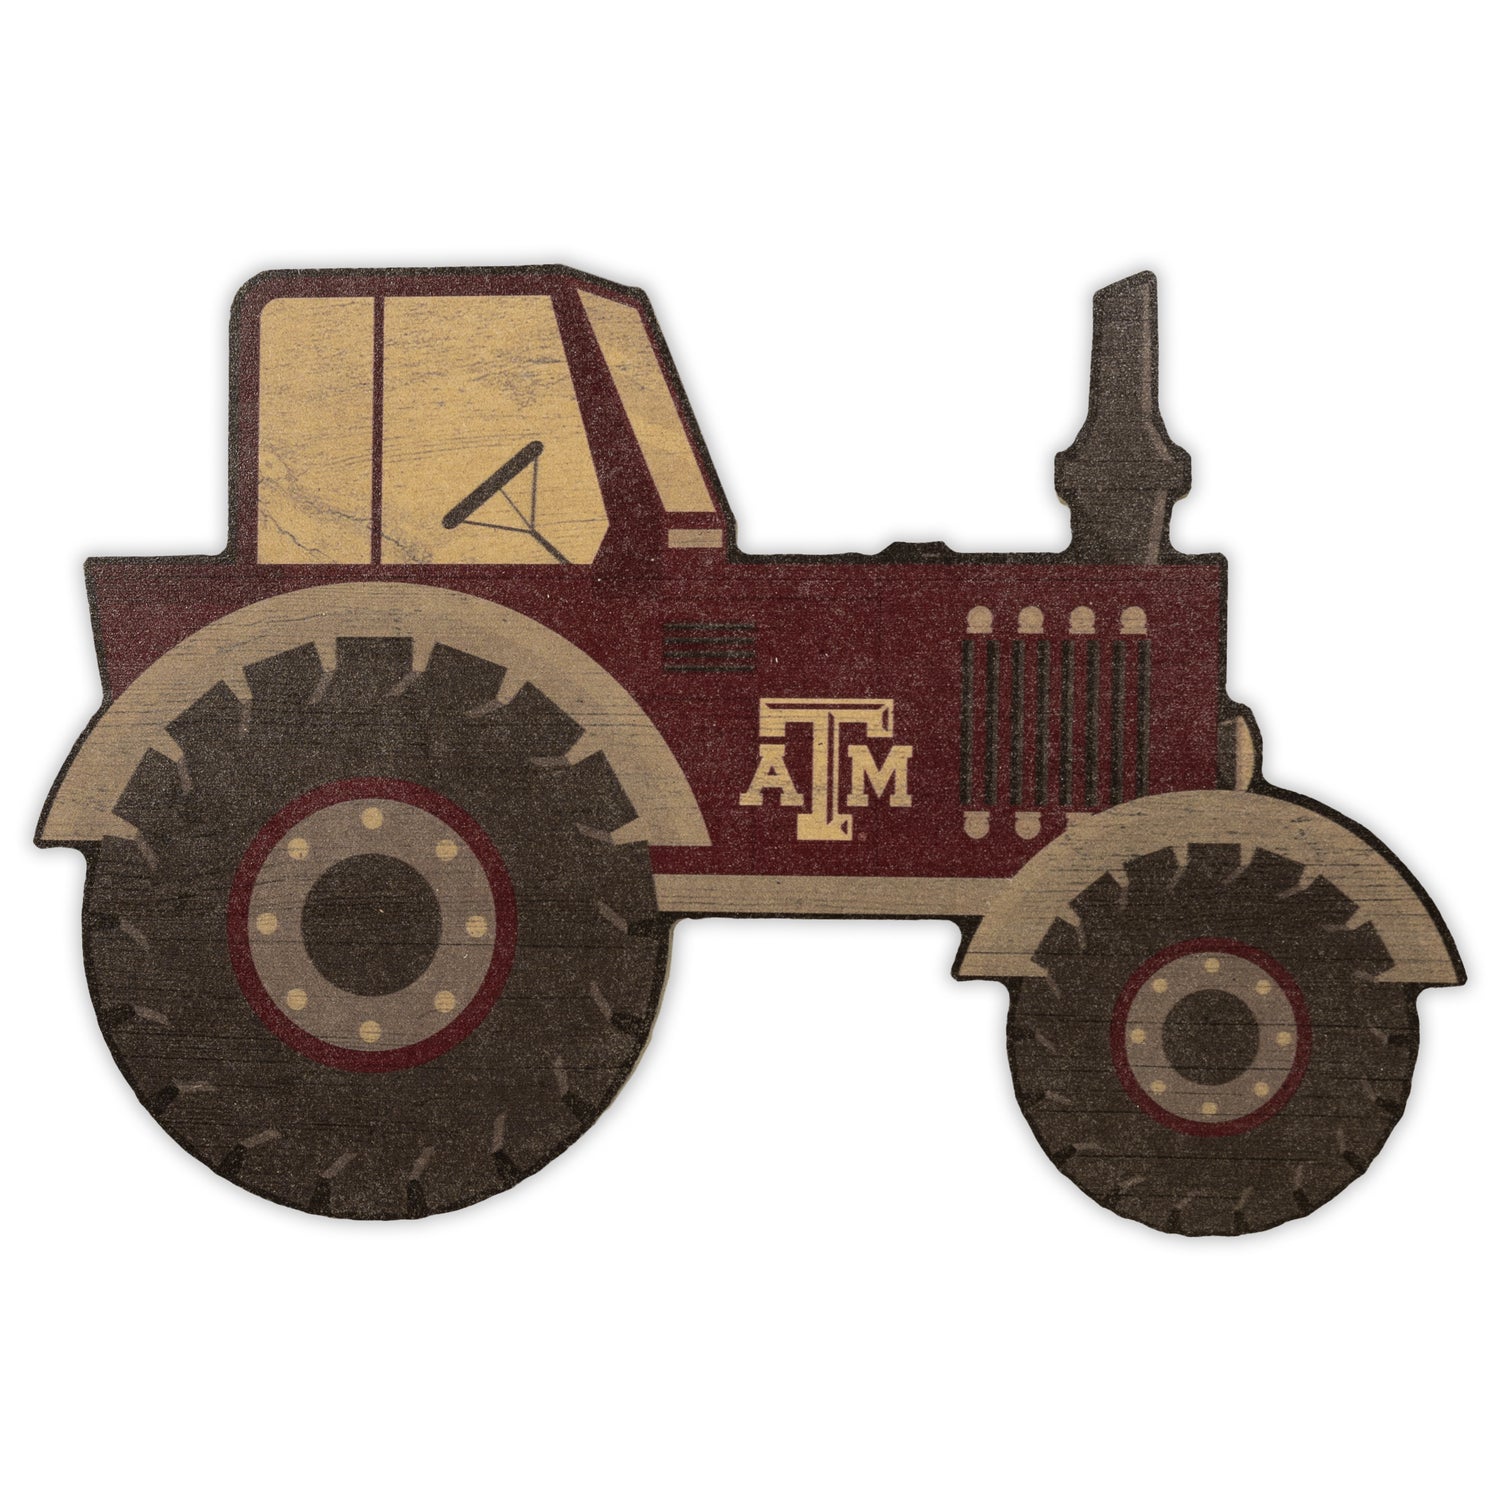 Texas A&M Tractor Cutout Sign